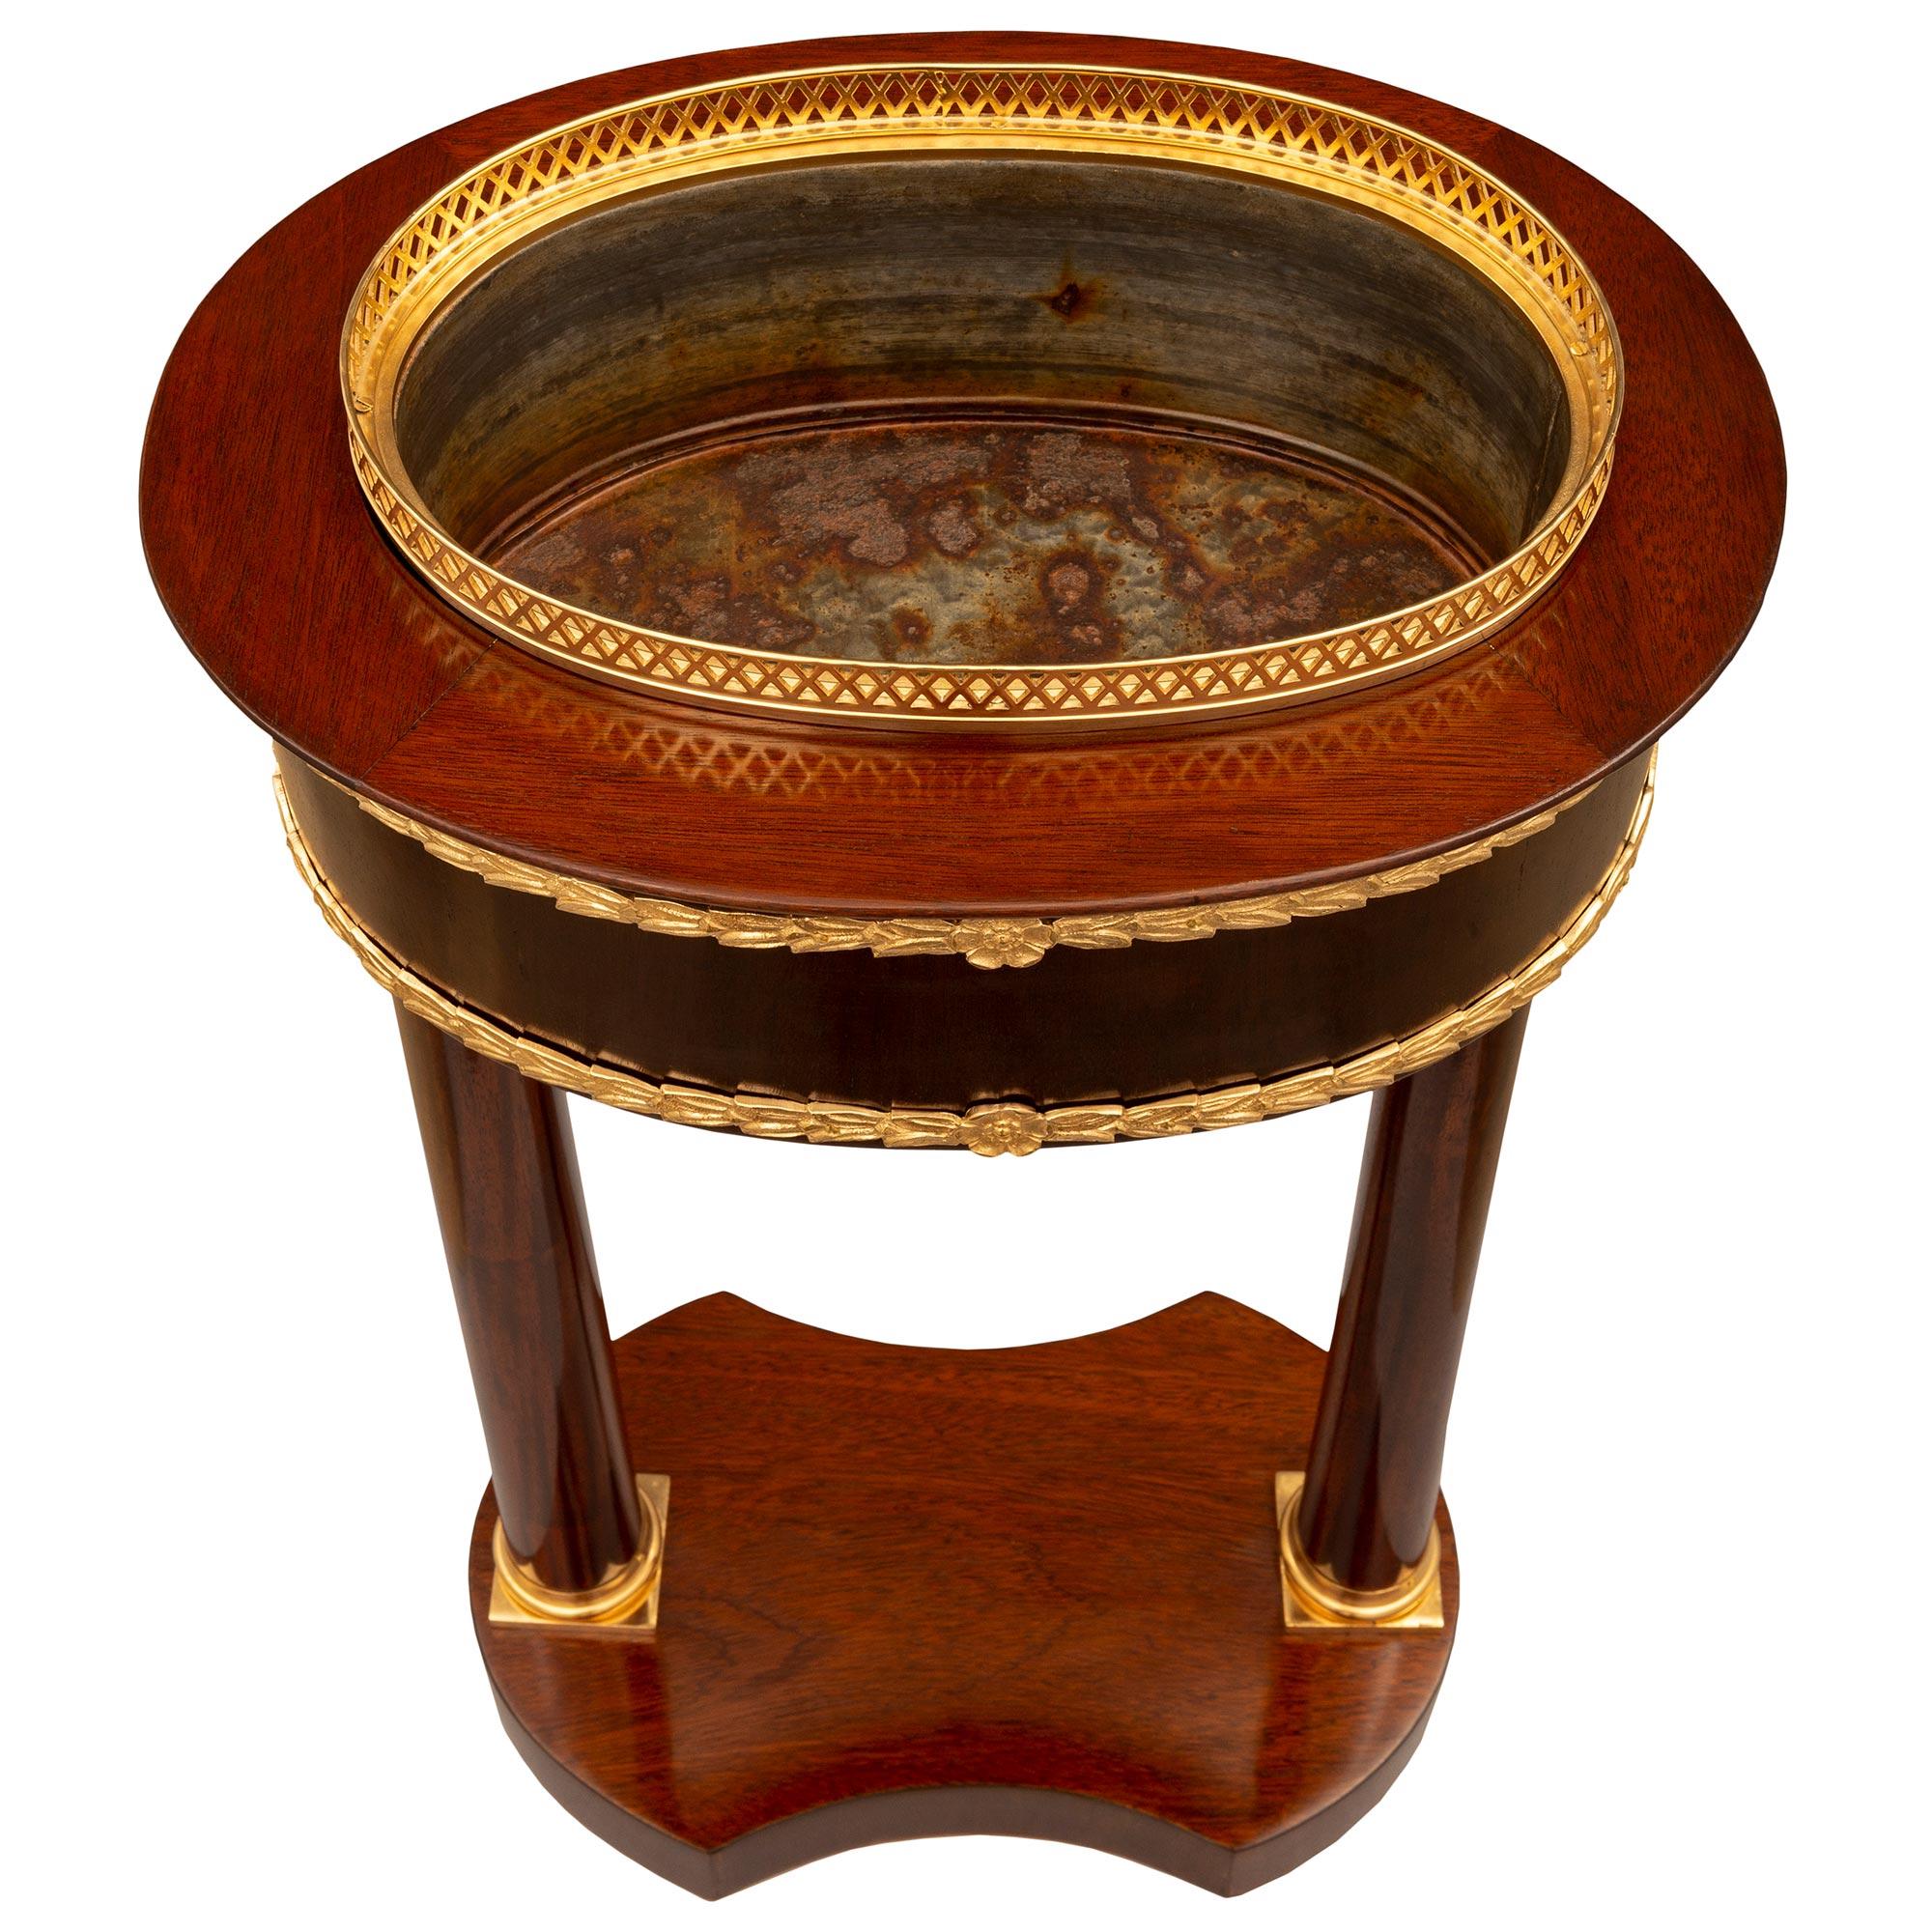 An exceptional and most decorative French early 19th century Directoire st. Mahogany and ormolu jardiniere planter circa 1805. The planter is raised by an elegant bottom tier with fine concave front and back and lovely rounded sides. Two impressive